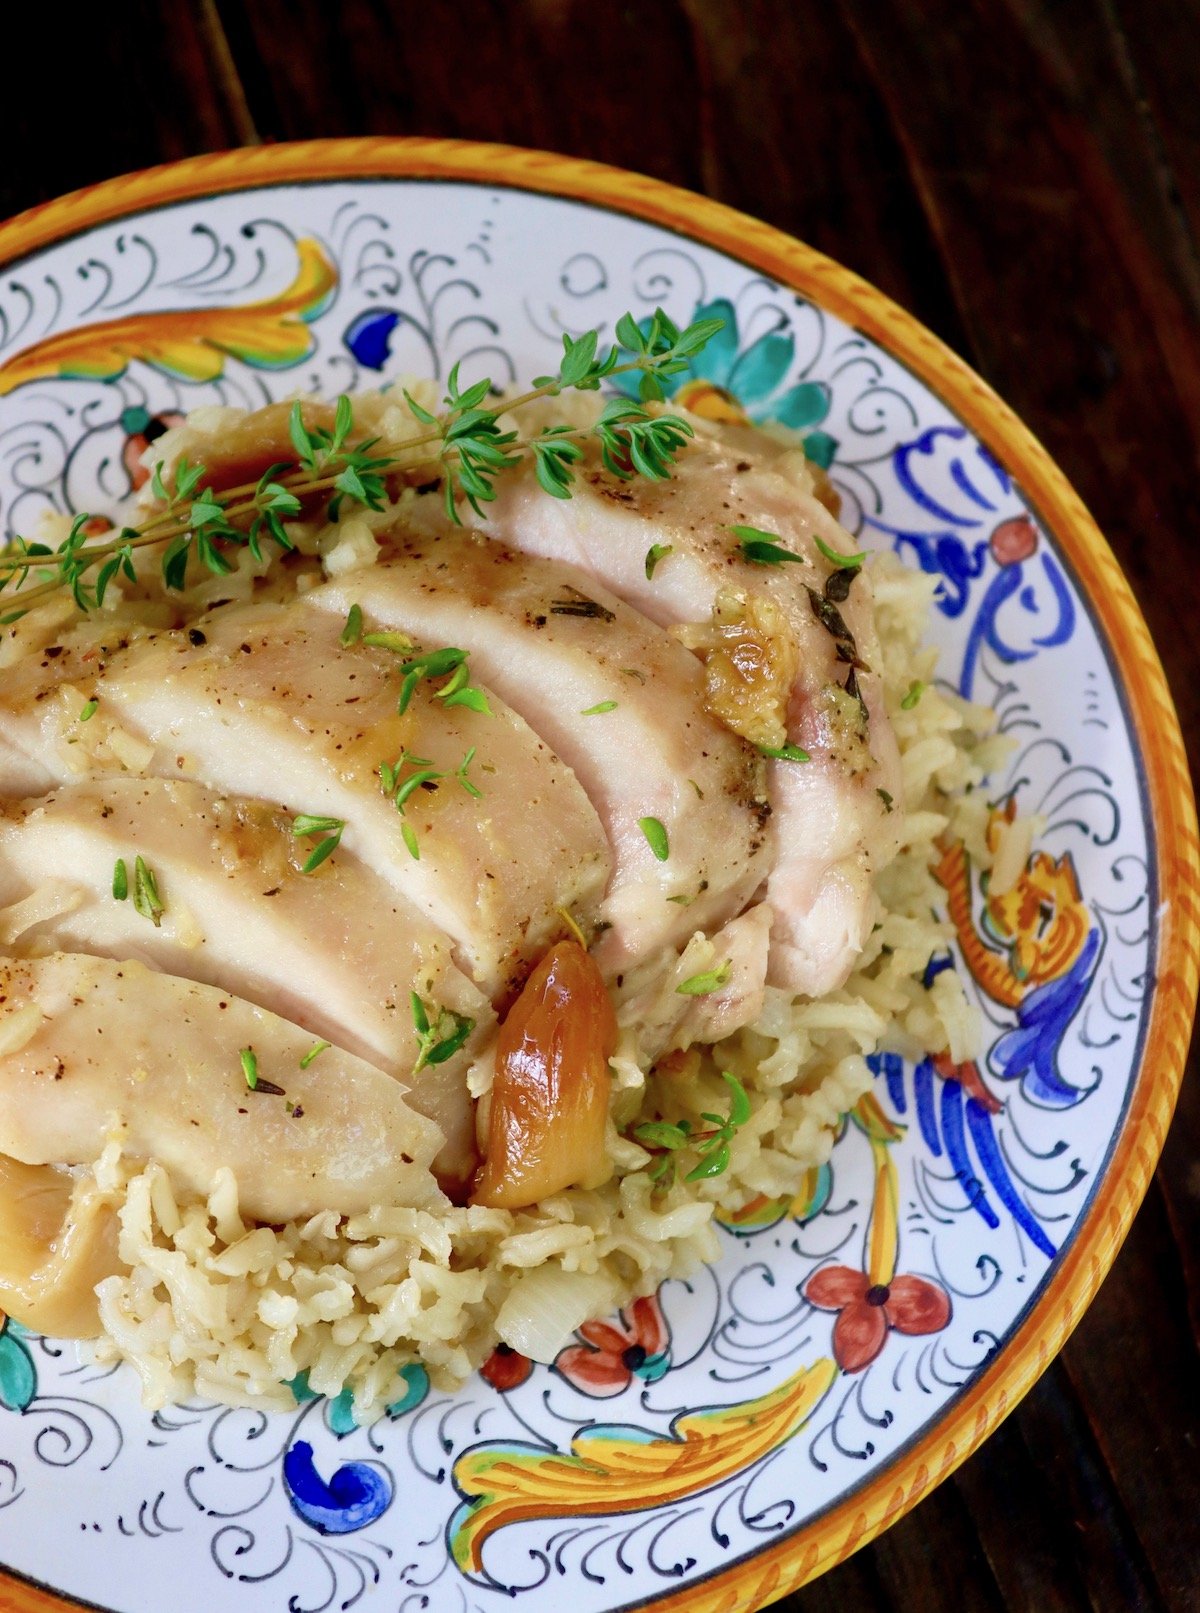 Sliced chicken thigh on brown rice with whole roasted garlic cloves, on Italian gold and blue painted plate.